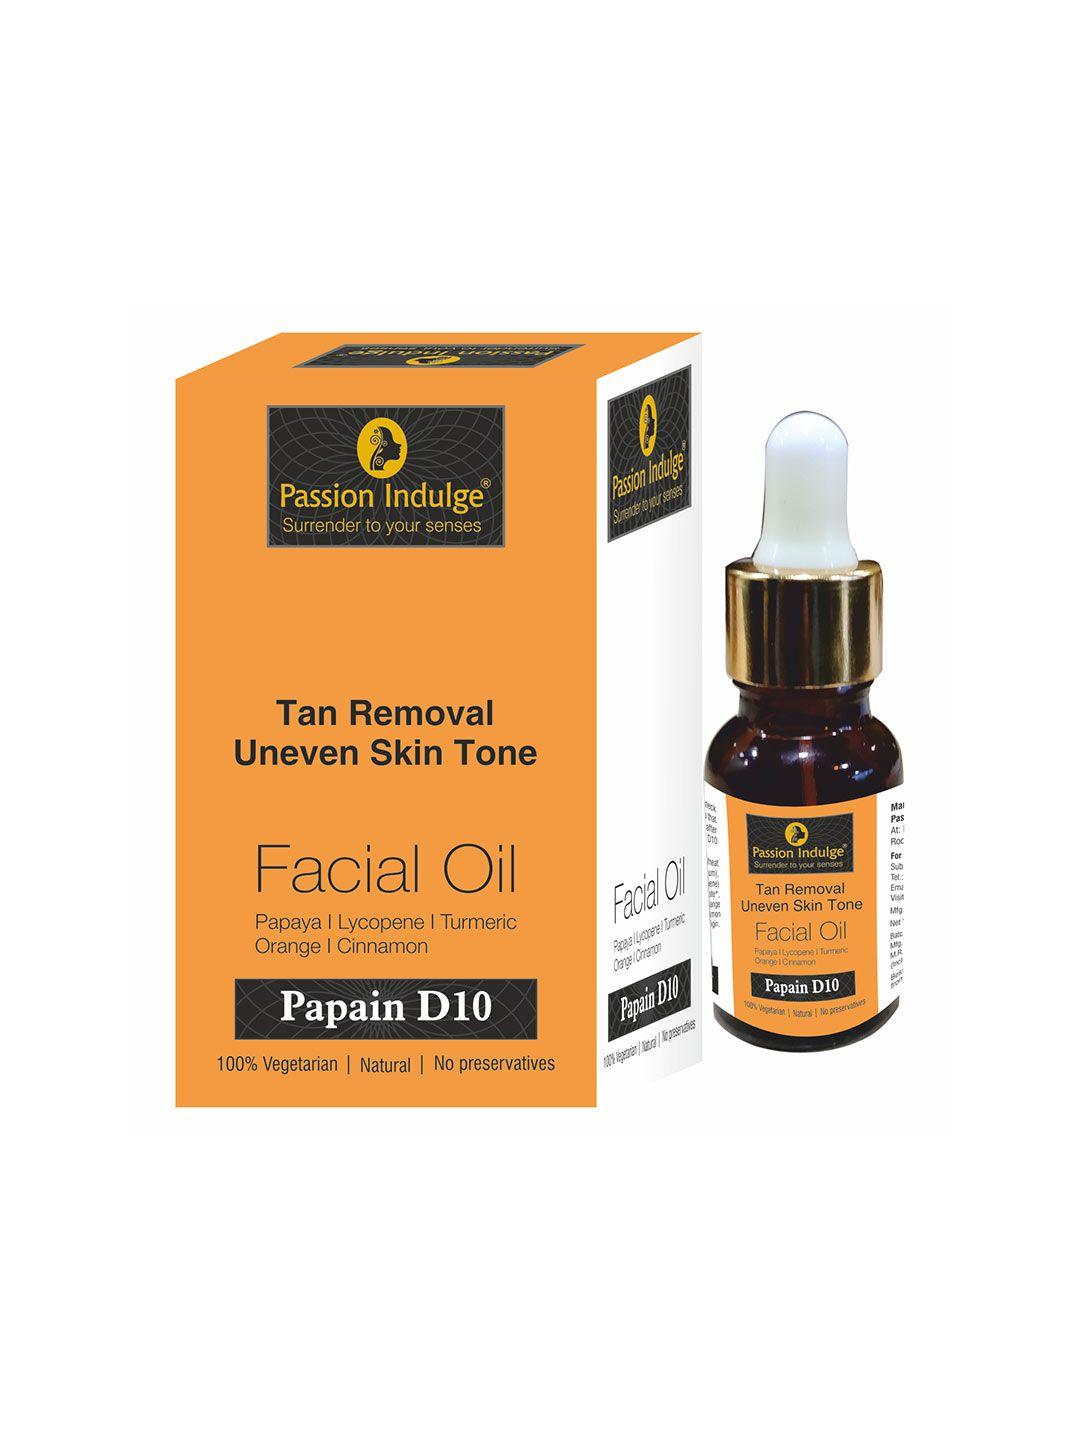 passion indulge unisex tan removal papain d10 face oil serum